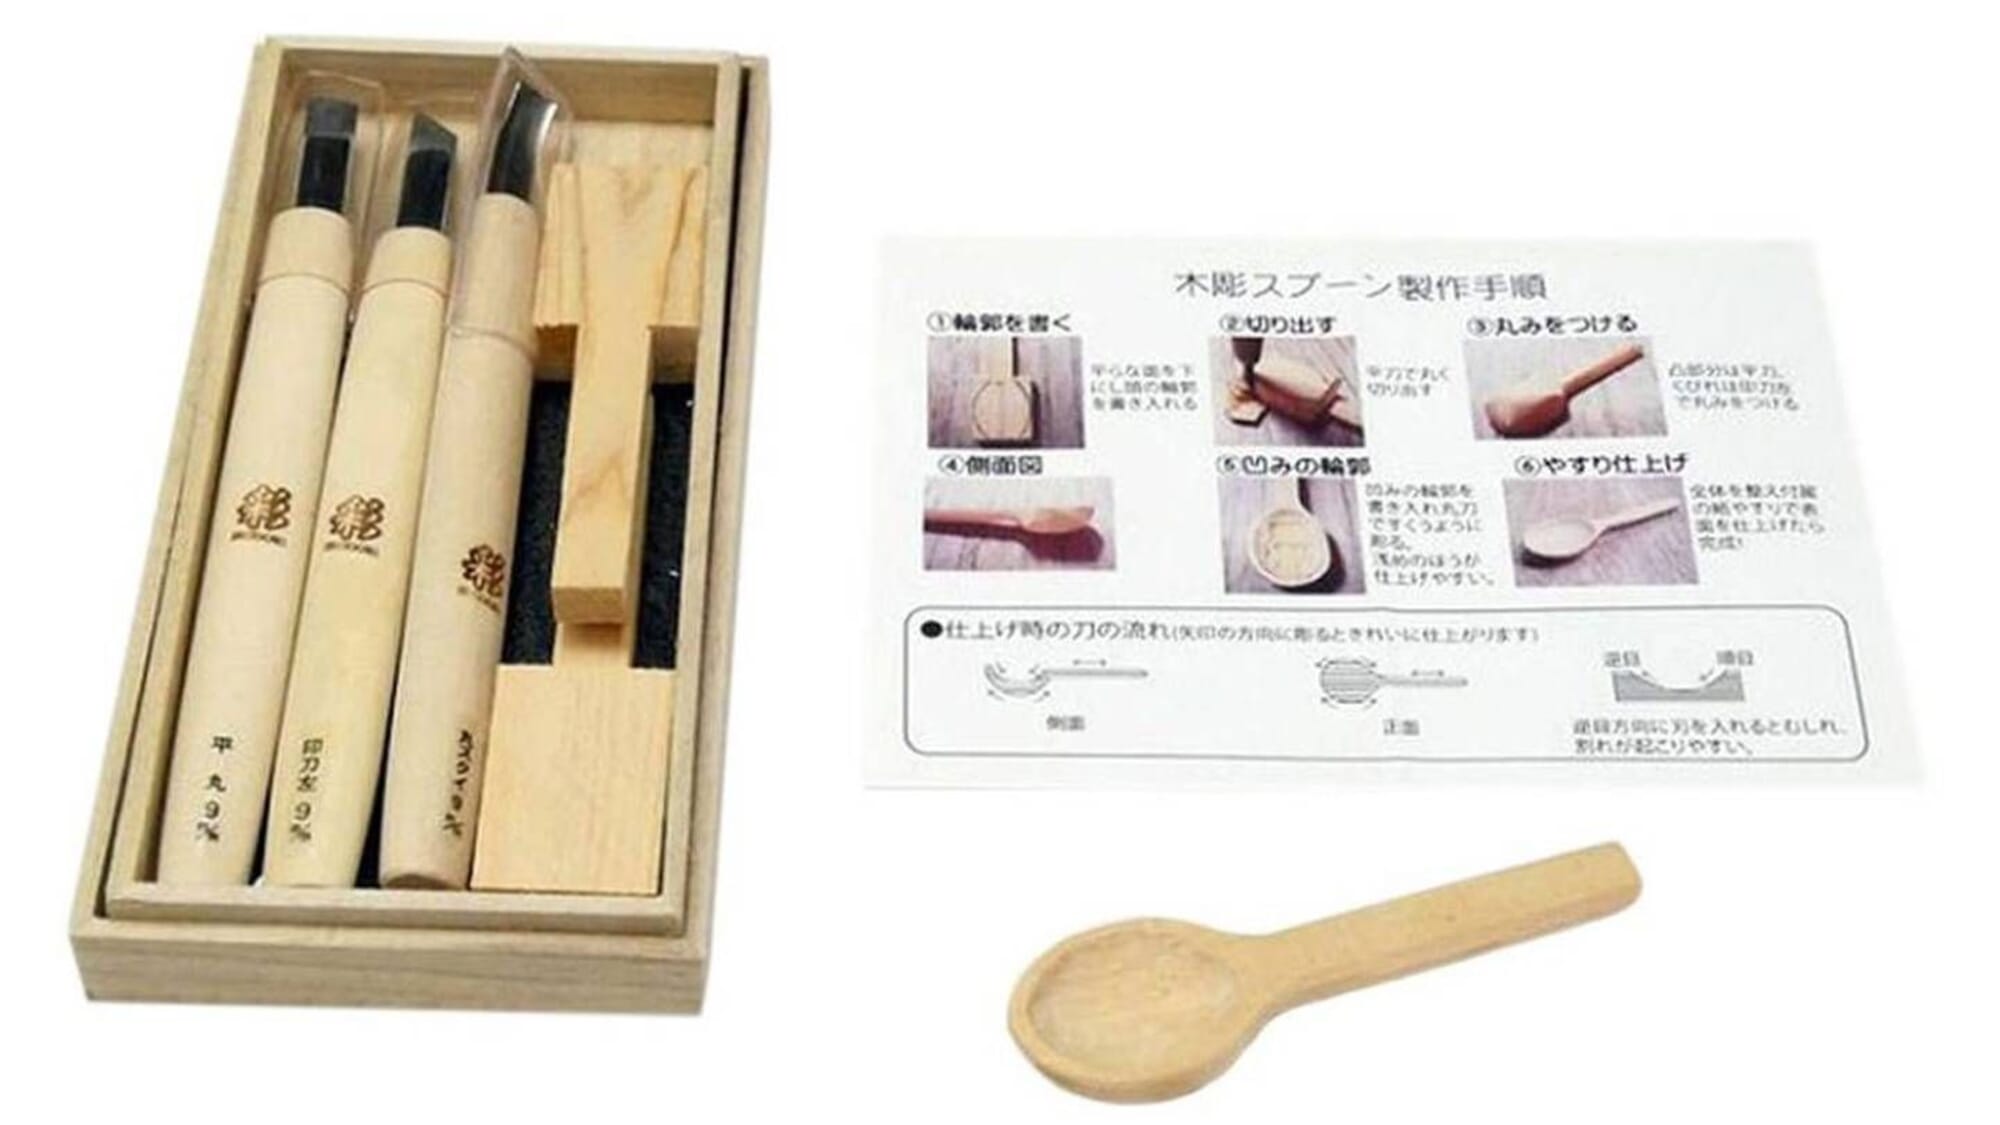 Spoon Carving Tool Kit - Wooden Spoon Carving